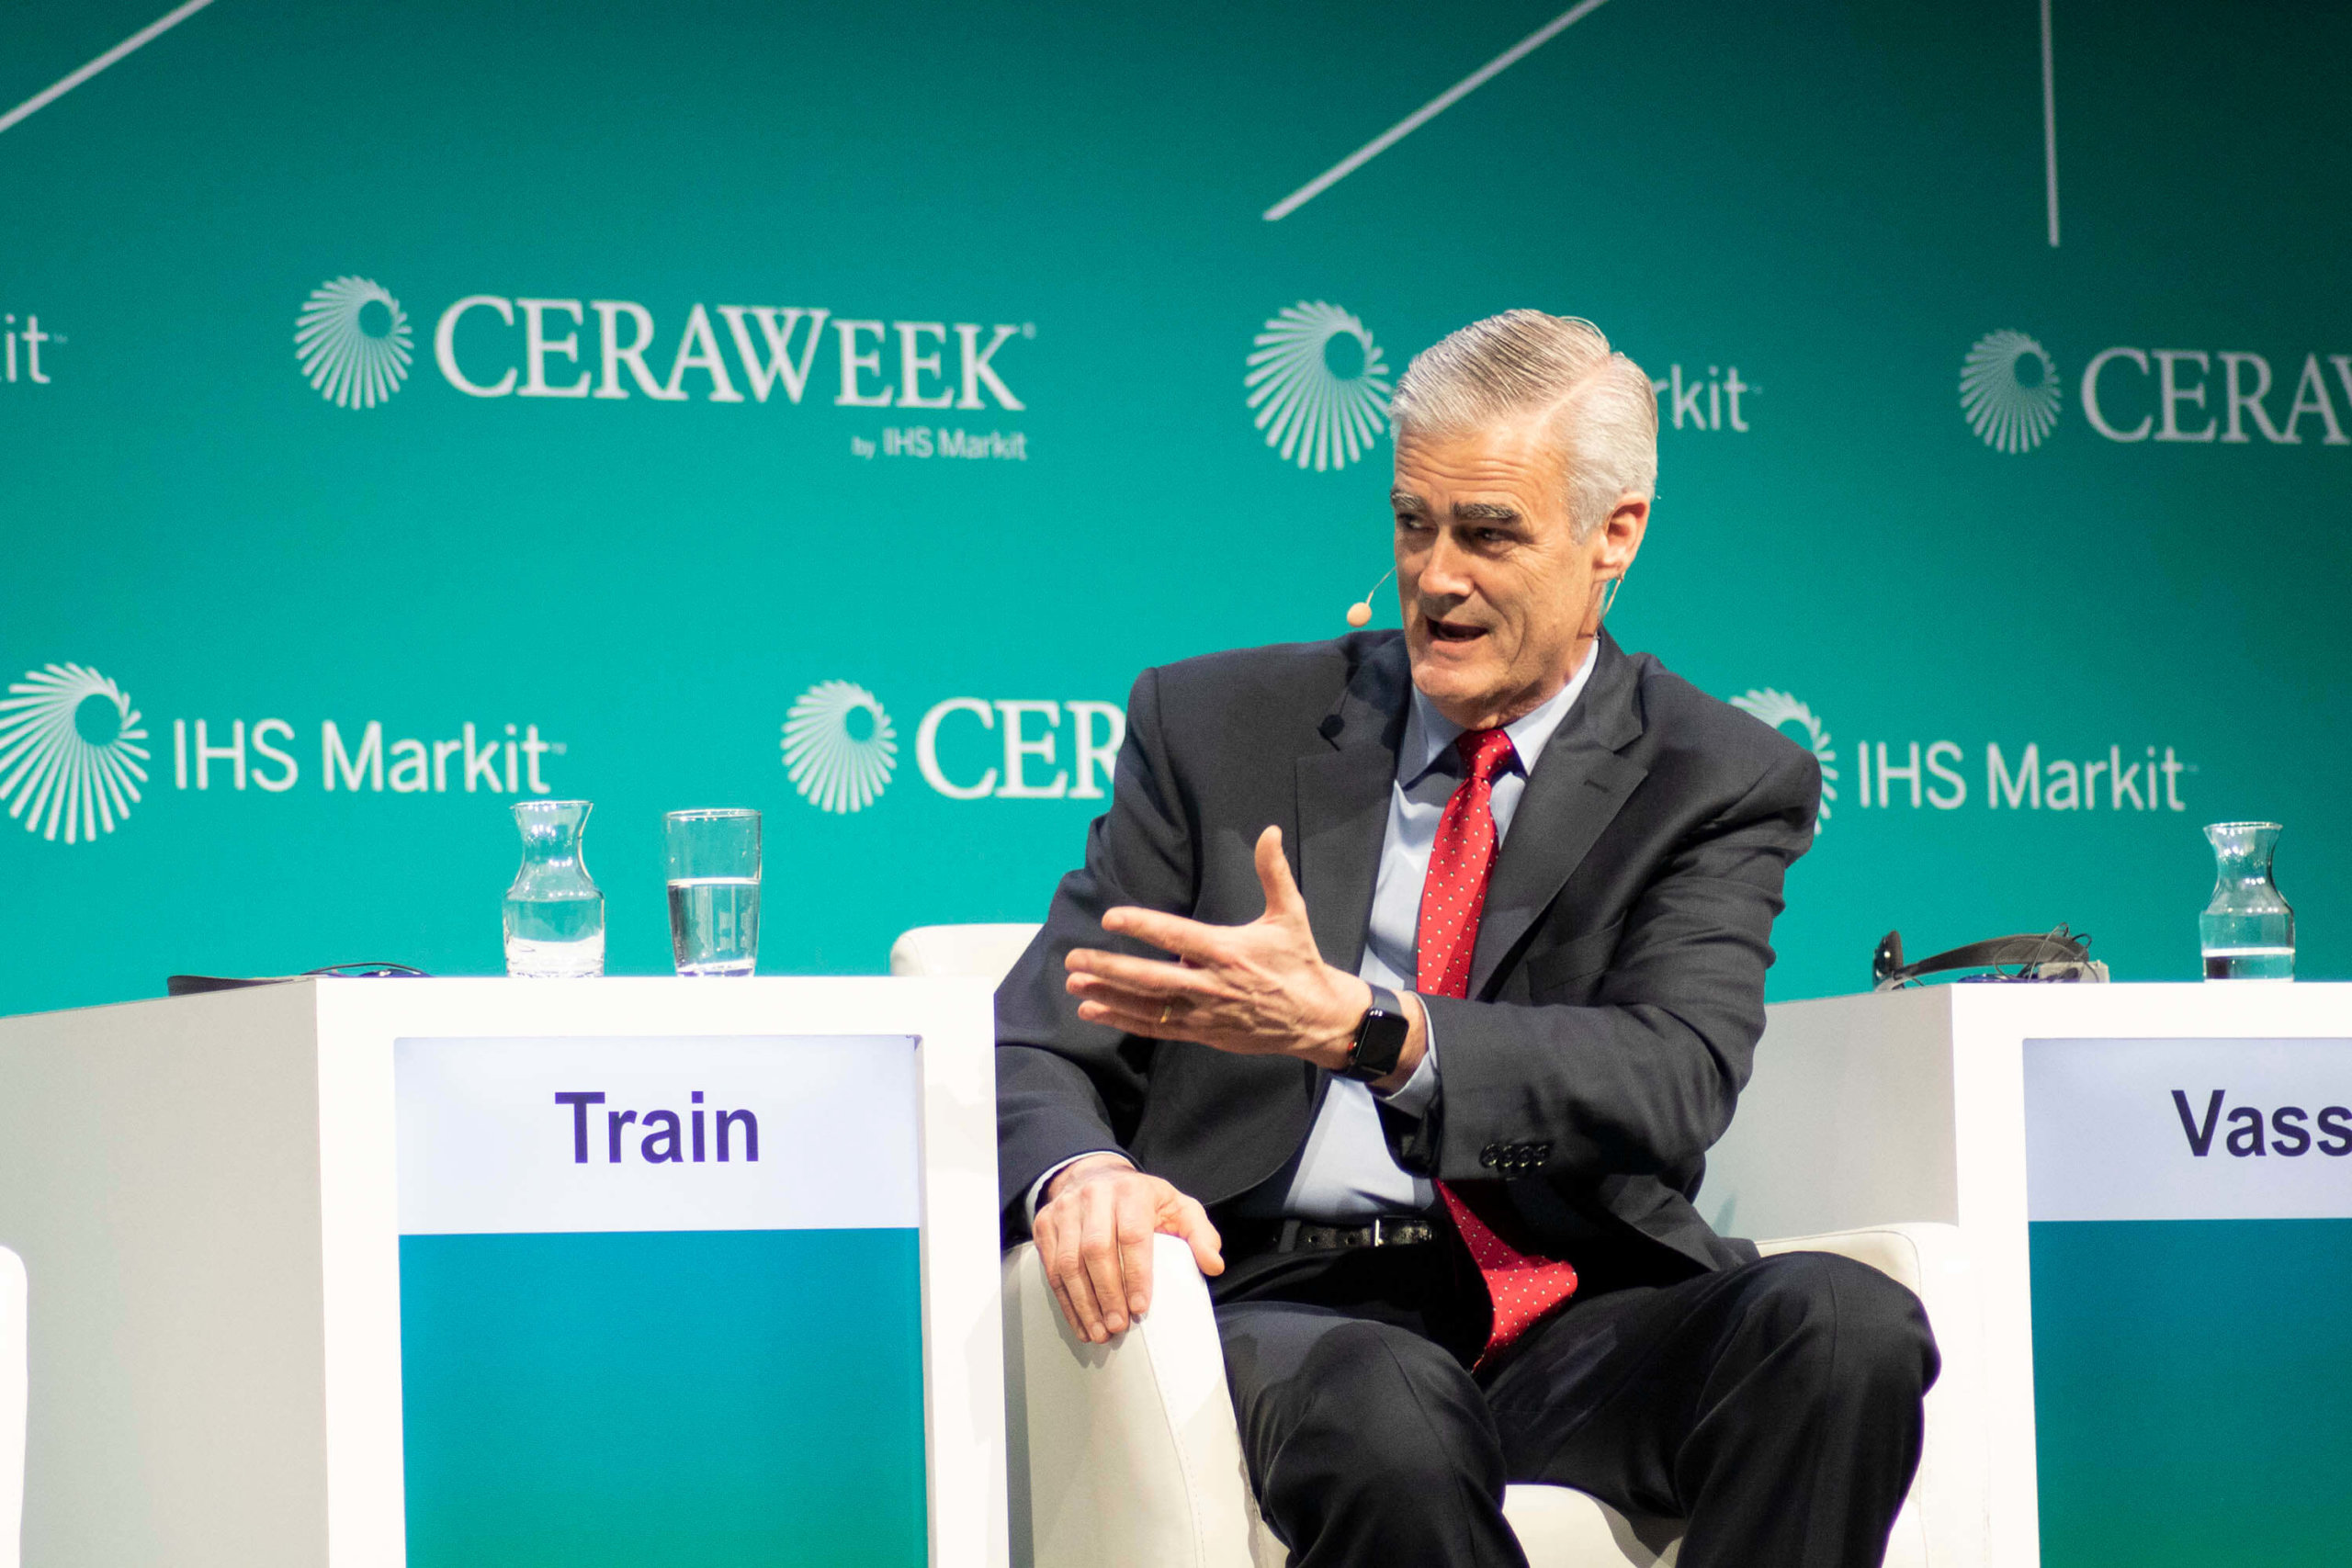 Emerson's Mike Train on extracting value from technology at CERAWeek 2019